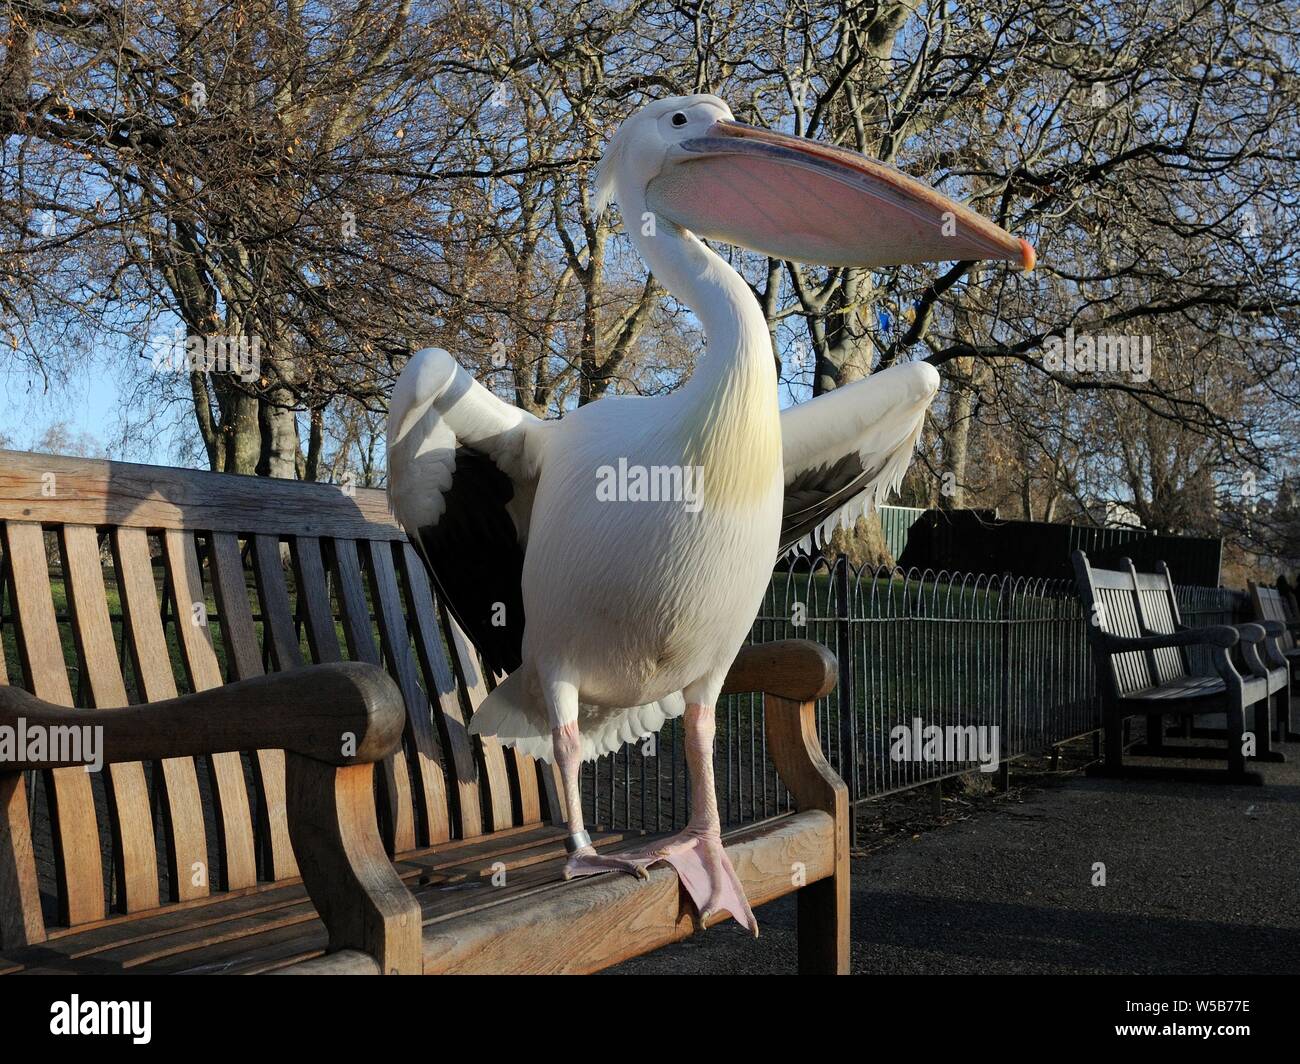 Great white / Eastern white pelican (Pelecanus onocrotalus) standing on bench in morning sunshine to warm up, St.James's Park, London UK, January. Stock Photo